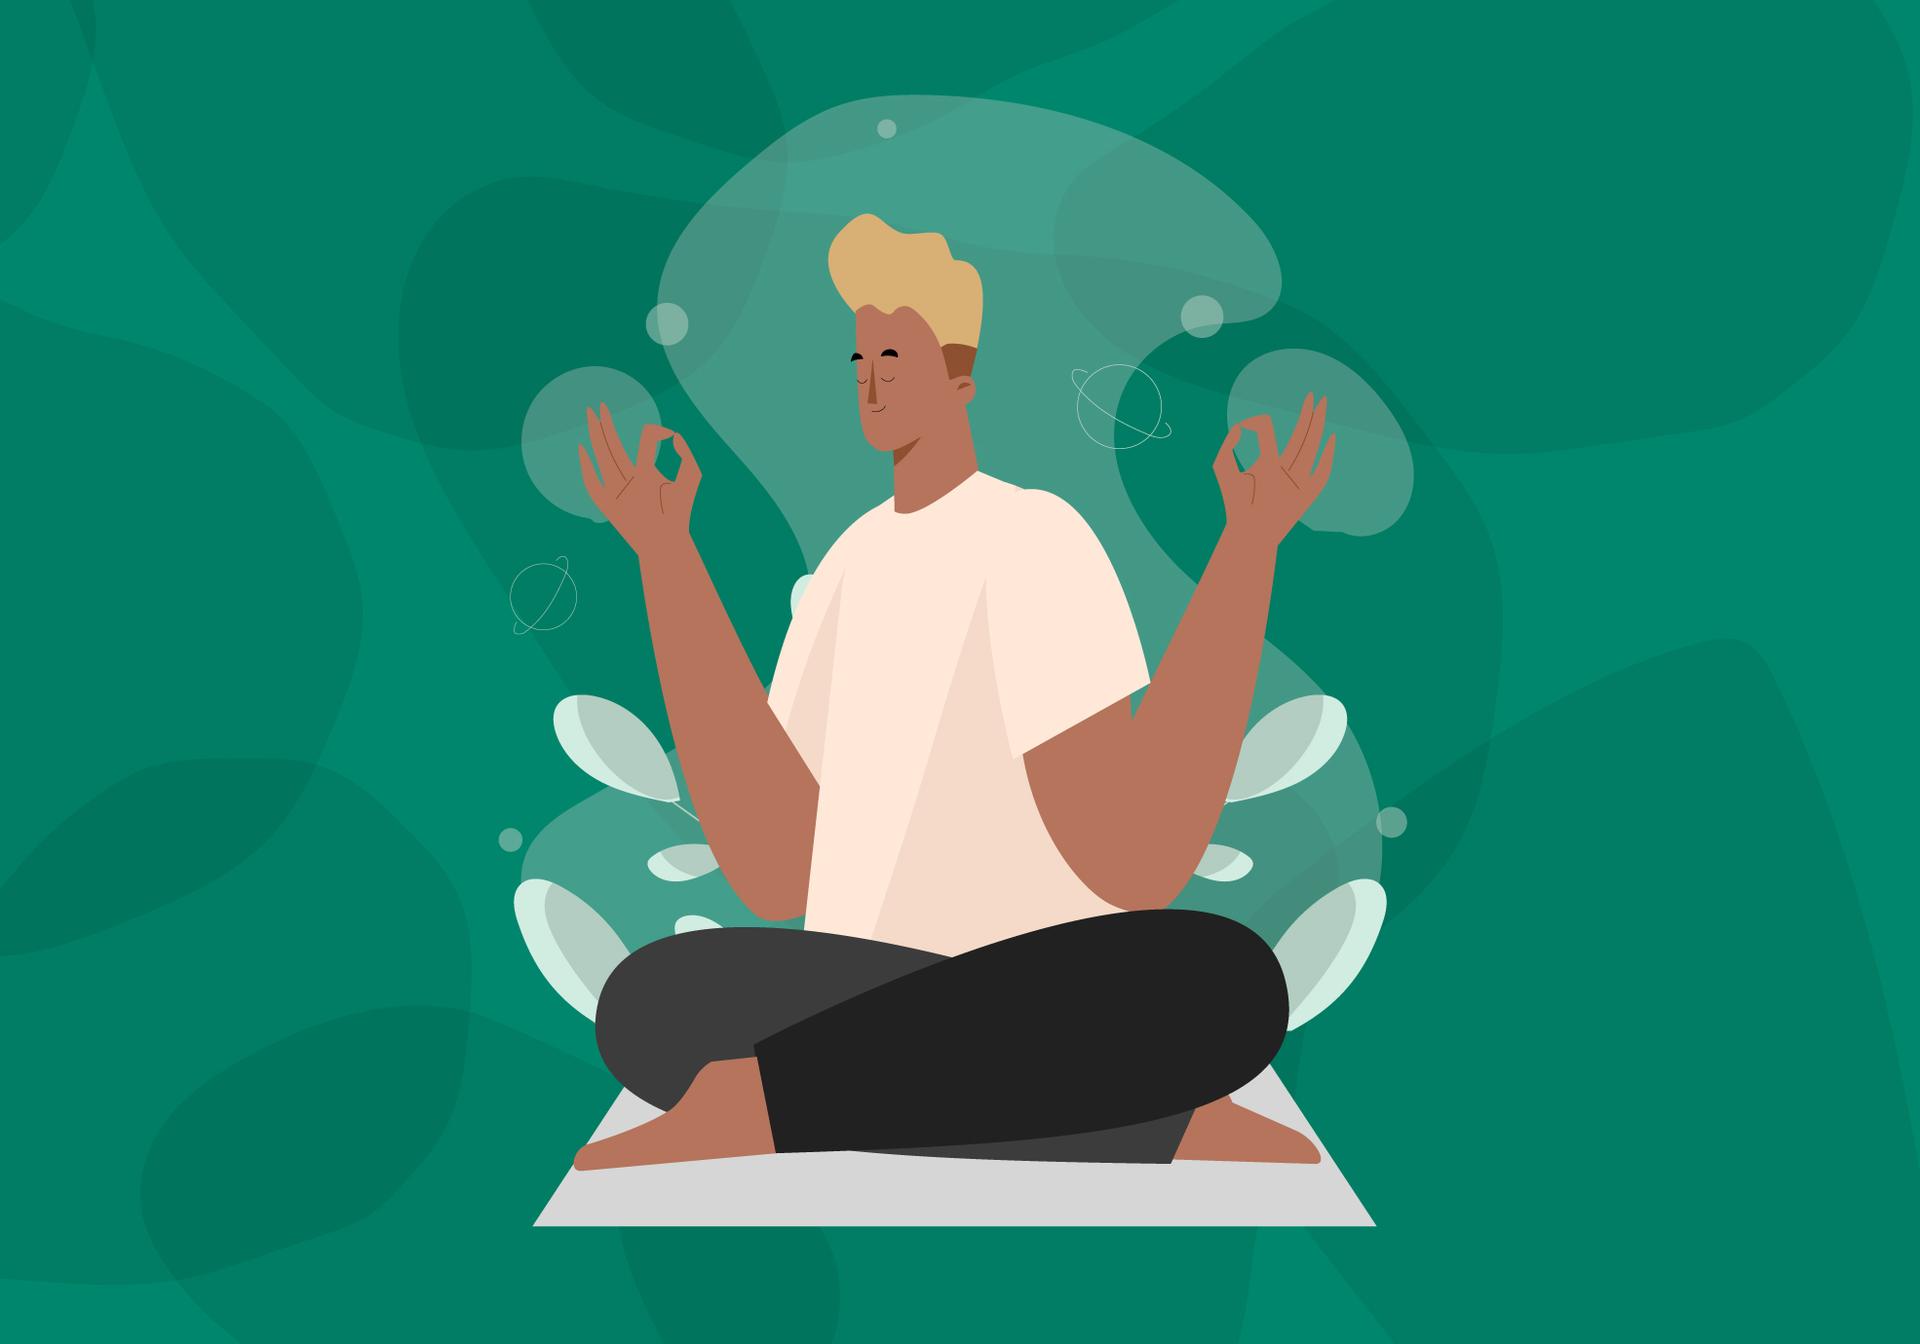 Illustration of a person with blond hair in a resting yoga pose on an illustrated green background